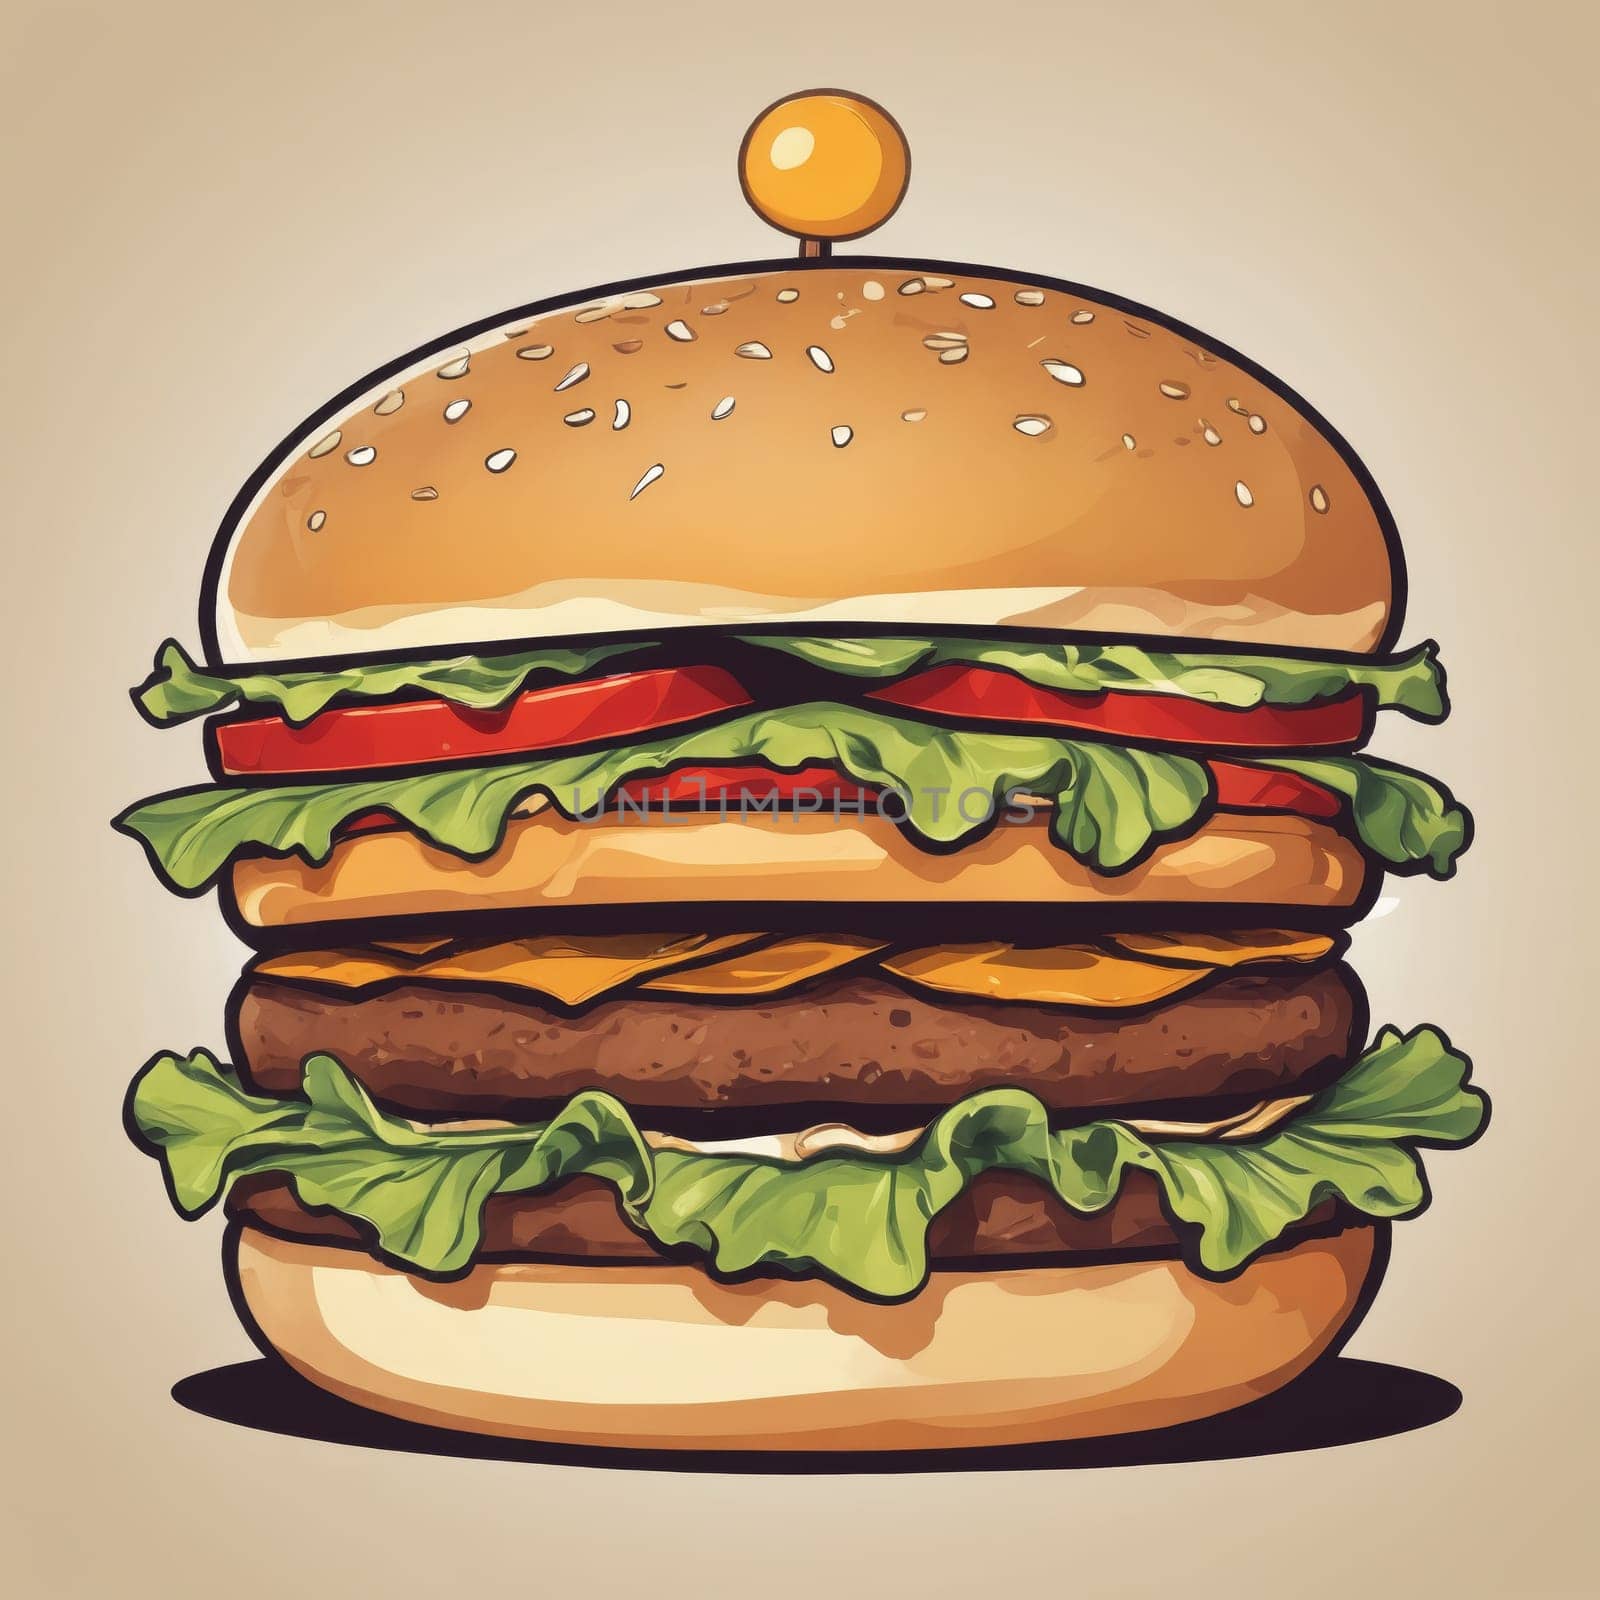 Simple yet appetizing, this burger drawing melds art with the universal love for a good, hearty sandwich.